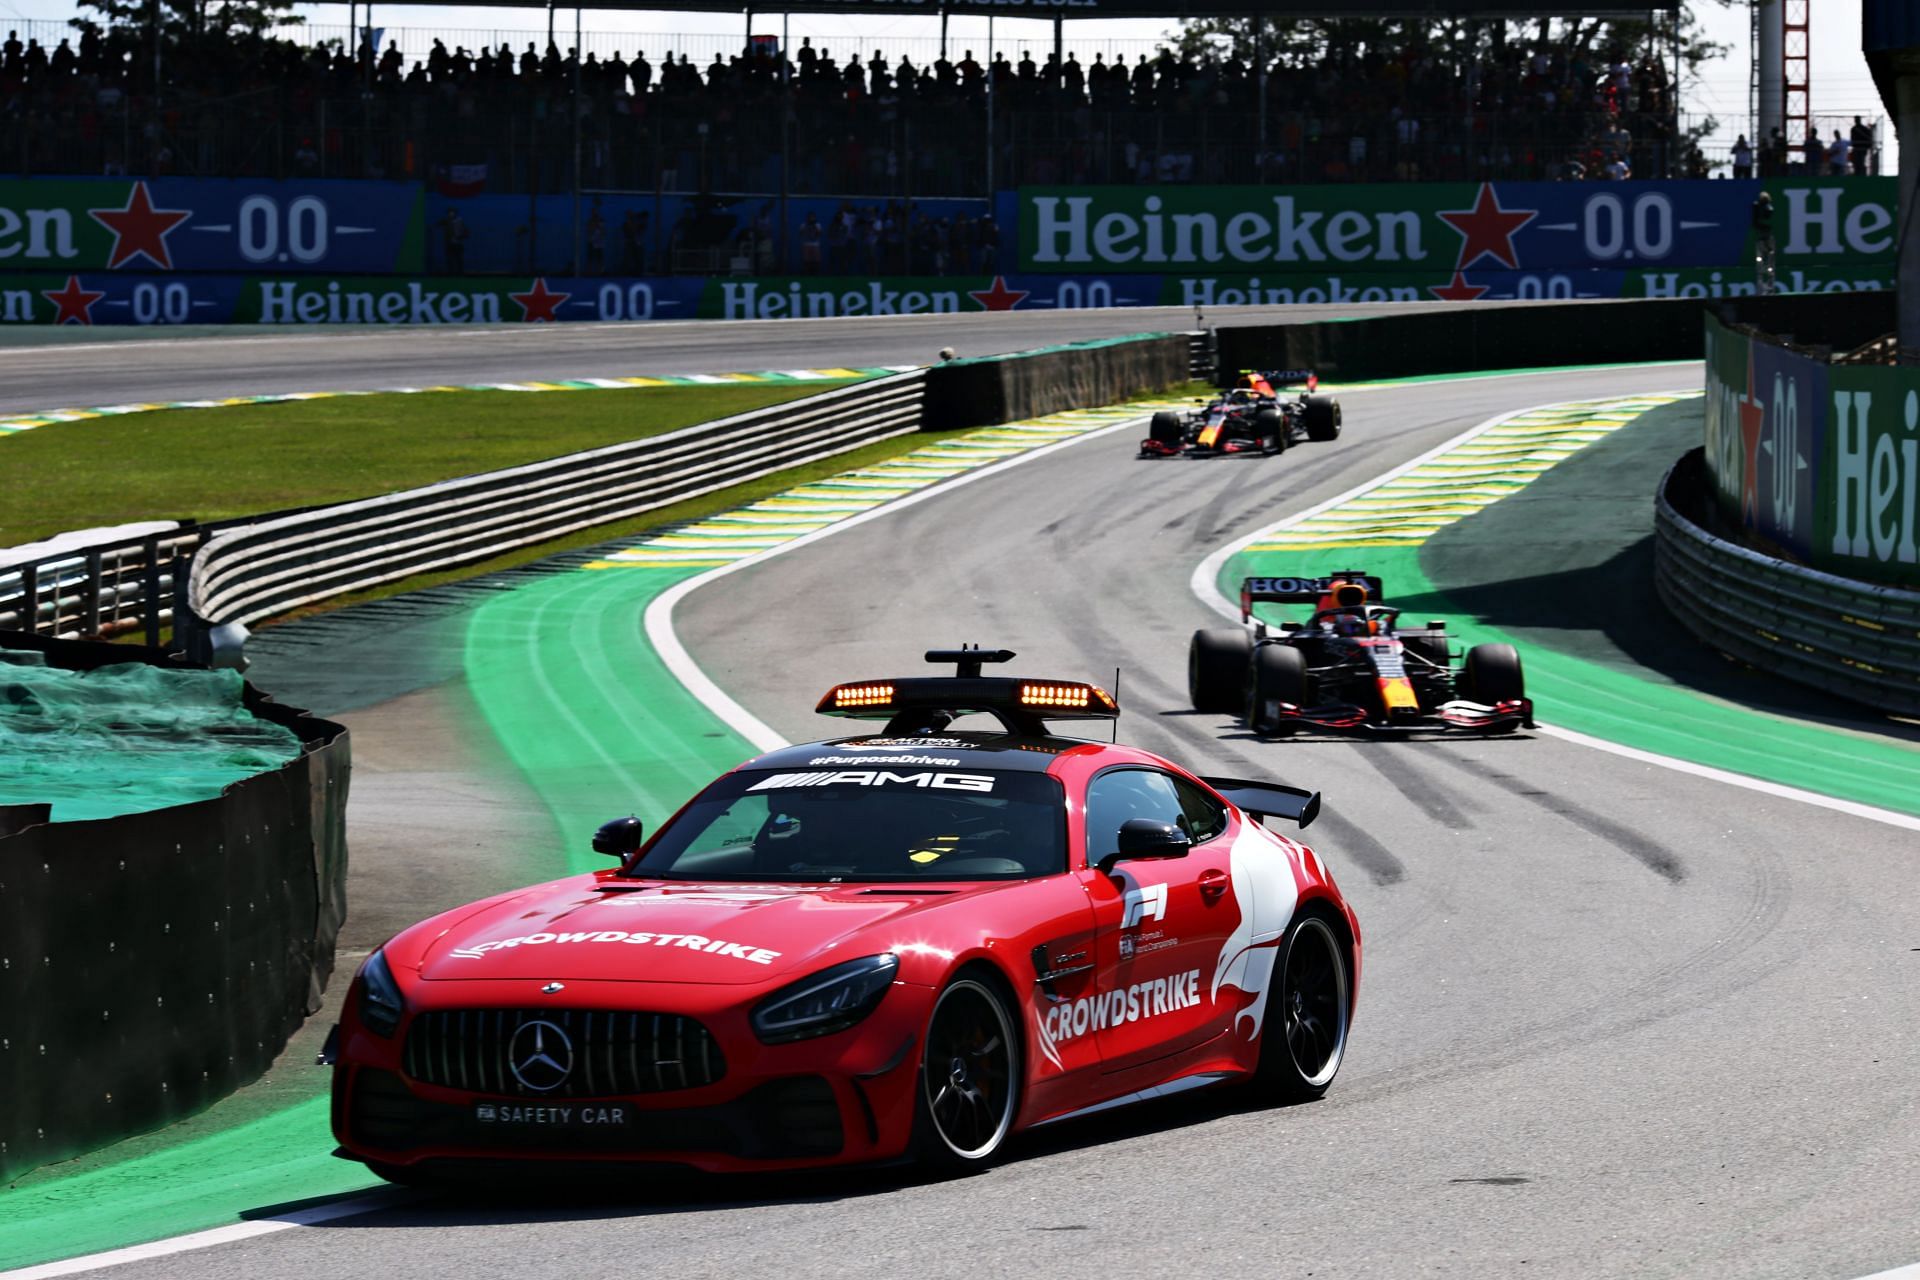 The FIA Safety Car leads the field through the pitlane during the F1 Grand Prix of Brazil at the Autodromo Jose Carlos Pace circuit. (Photo by Peter Fox/Getty Images)